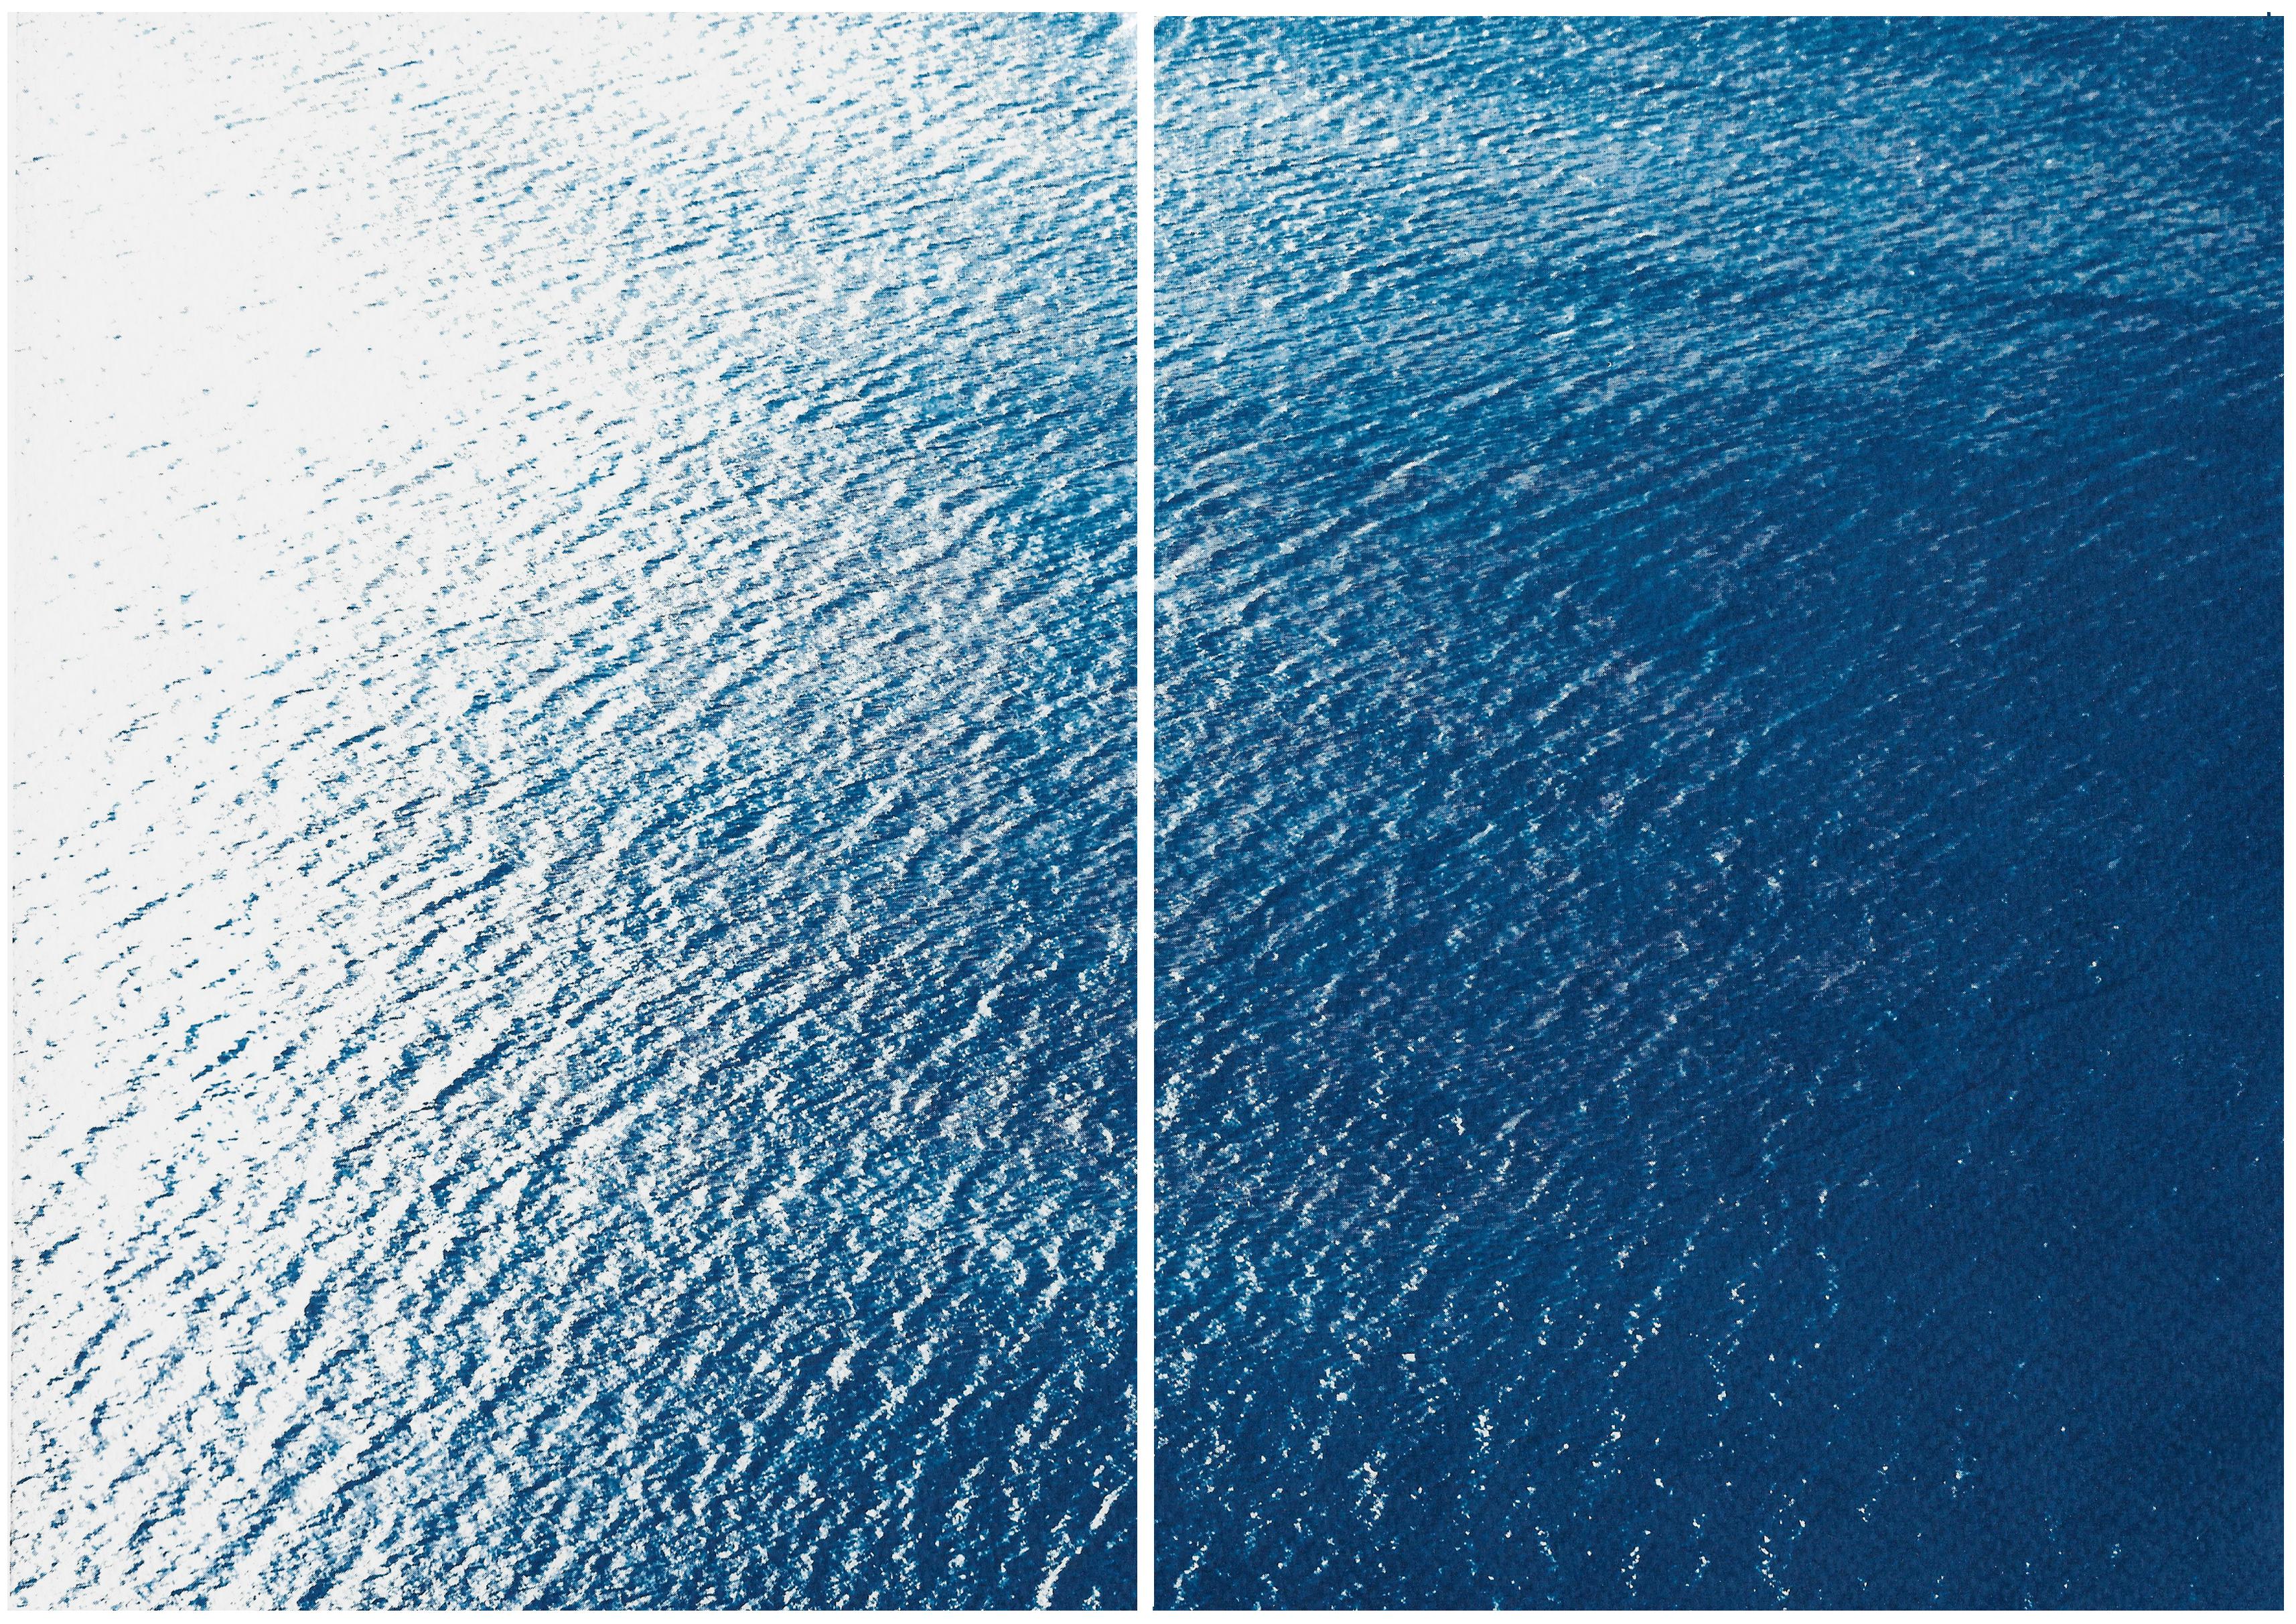 Kind of Cyan Landscape Painting - Smooth Bay in the Mediterranean, Classic Blue Diptych, Zen Seascape Coastal Life